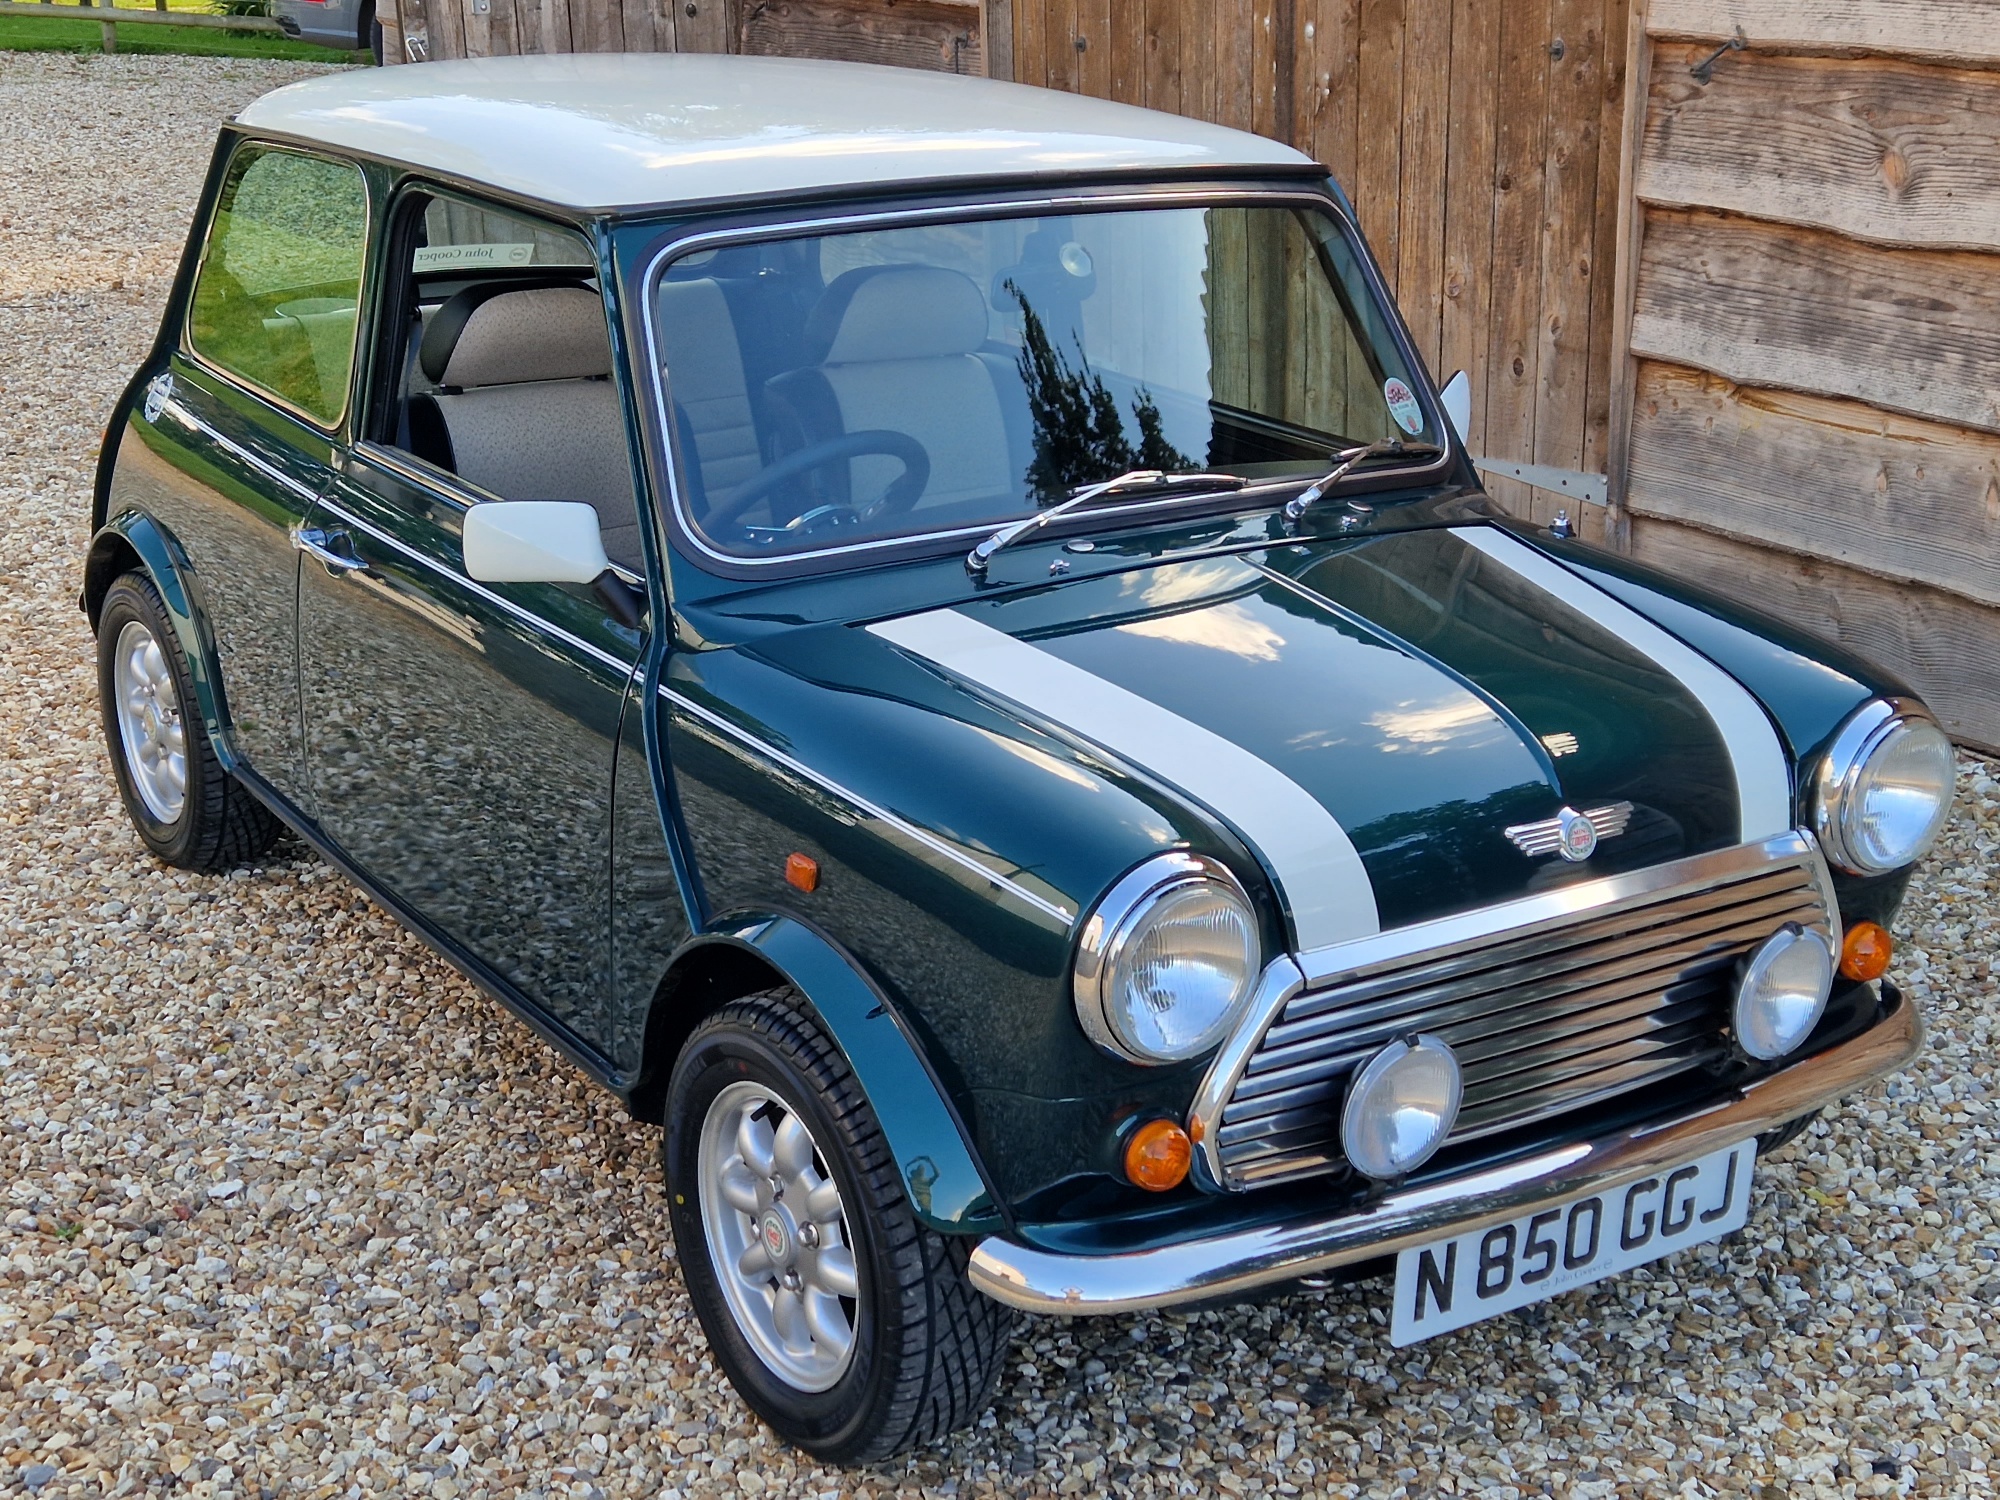 ** NOW SOLD ** 1995 Rover Mini Cooper On Just 29800 Miles From New!